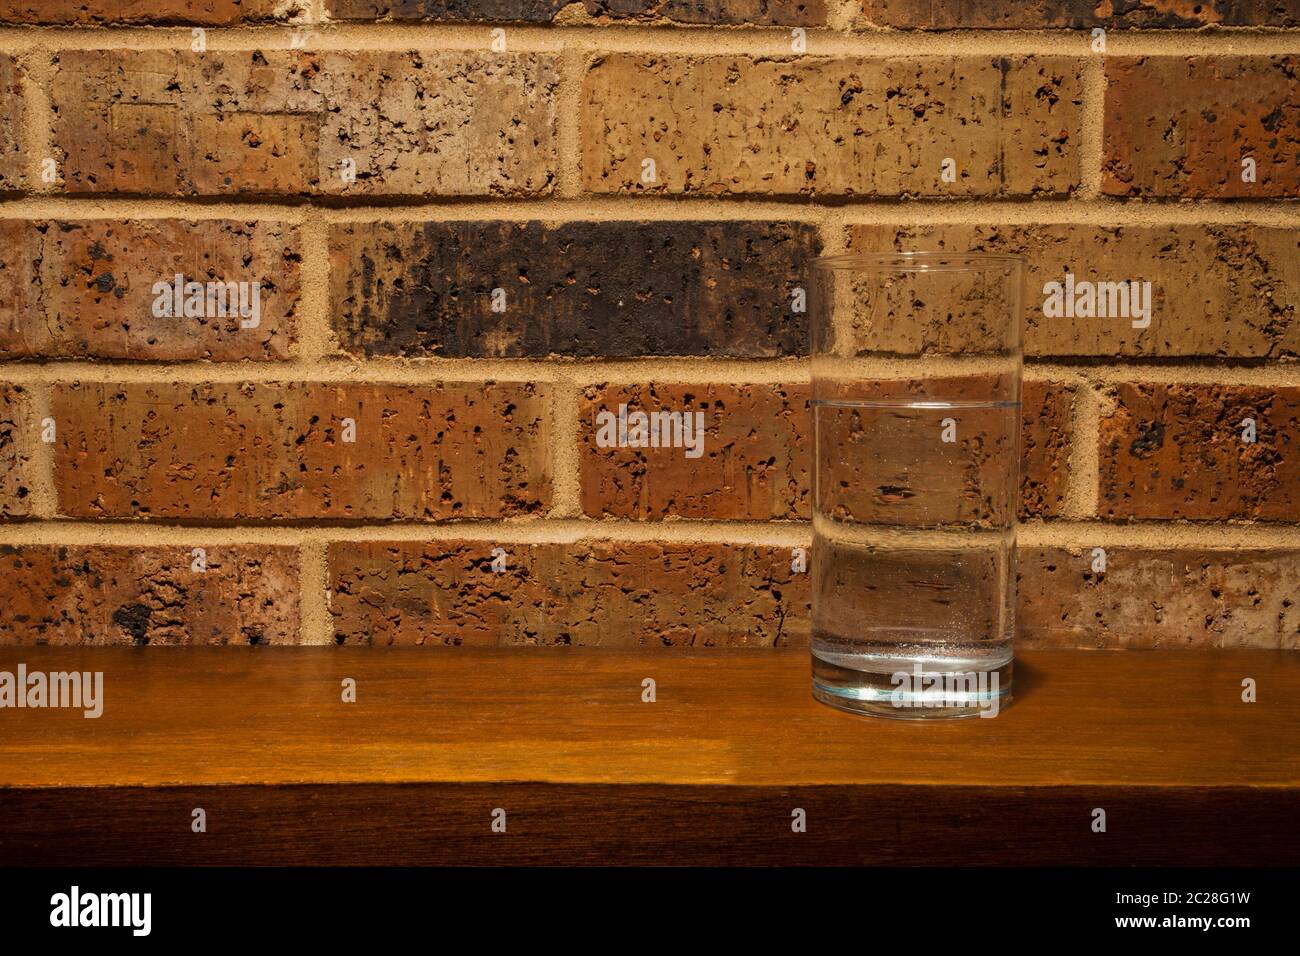 Glass of water on a fireplace mantle Stock Photo